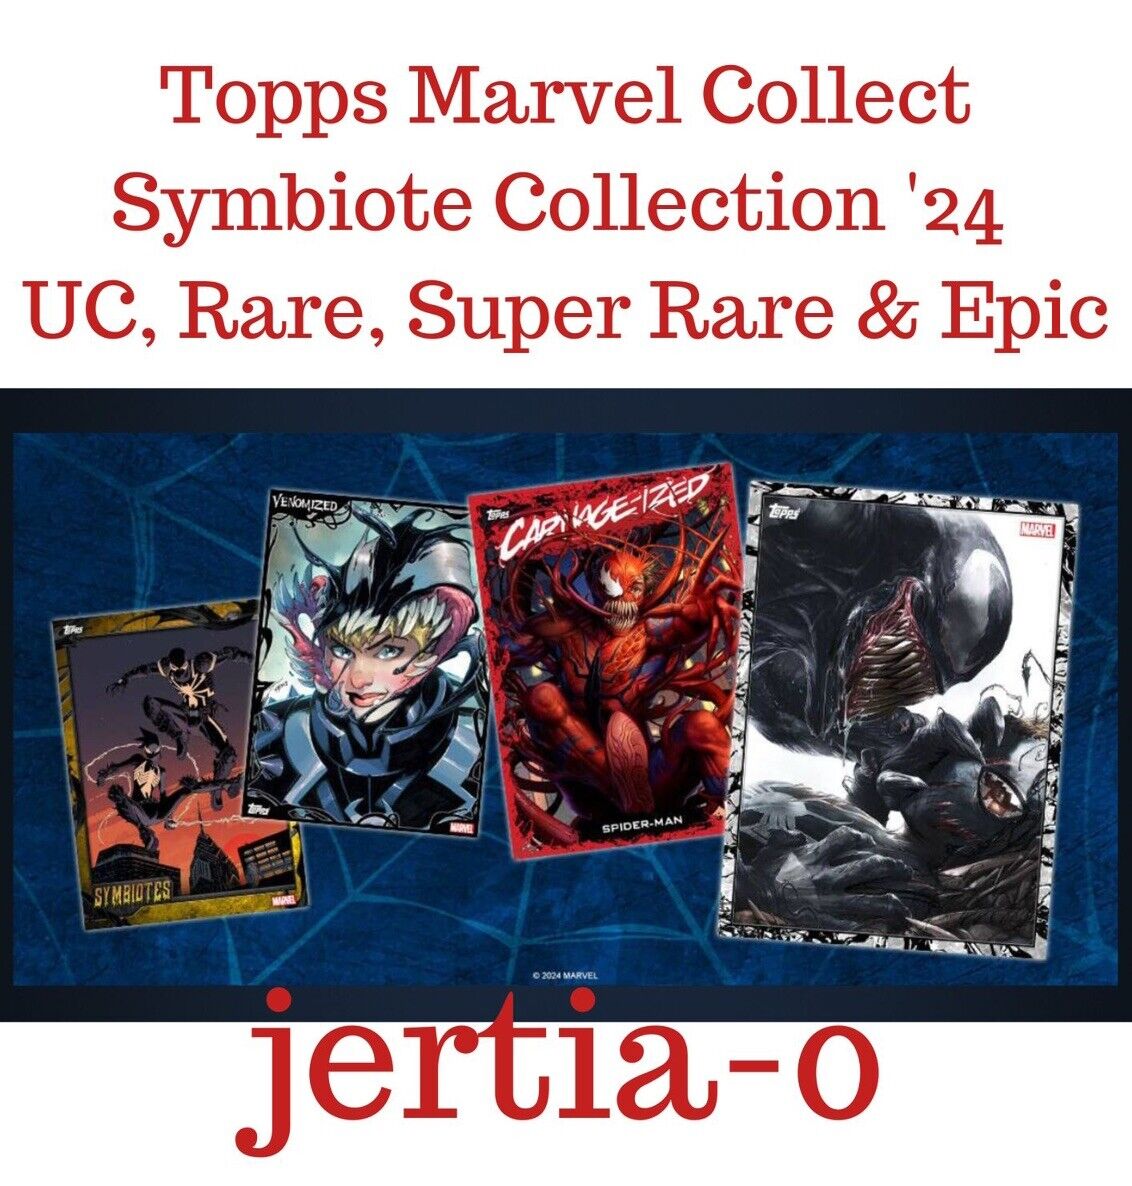 Topps Marvel Collect SYMBIOTE COLLECTION \'24 FULL SET